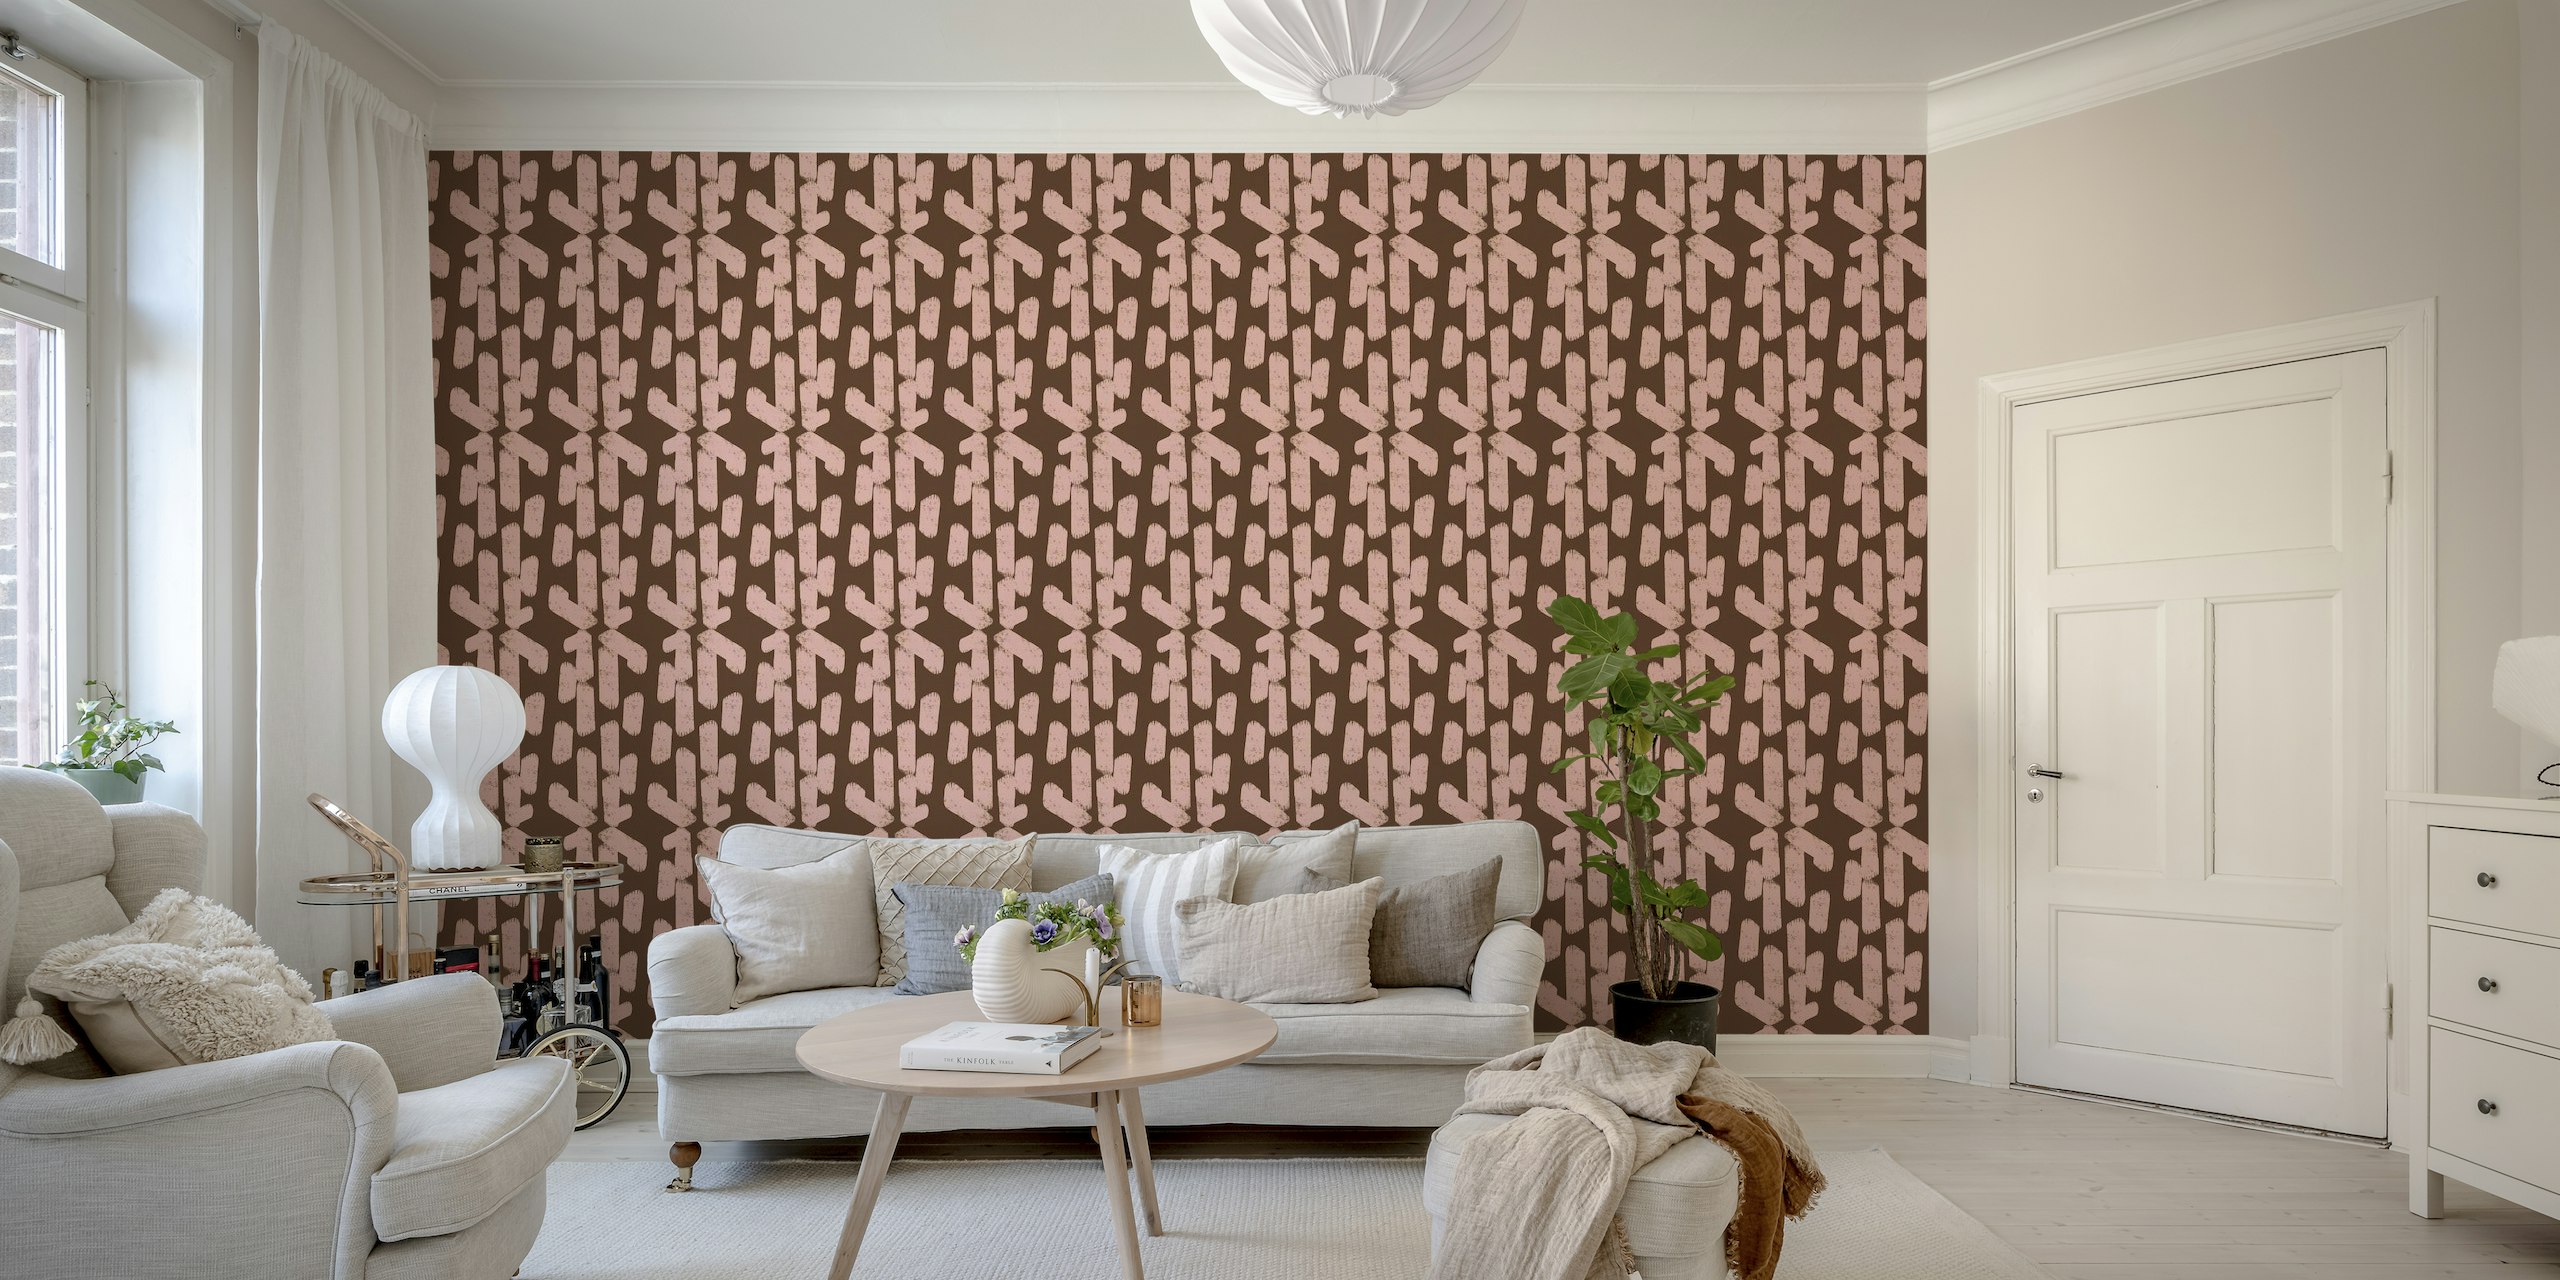 Mid Mod Geometric Tracks wall mural in brown and pink shades